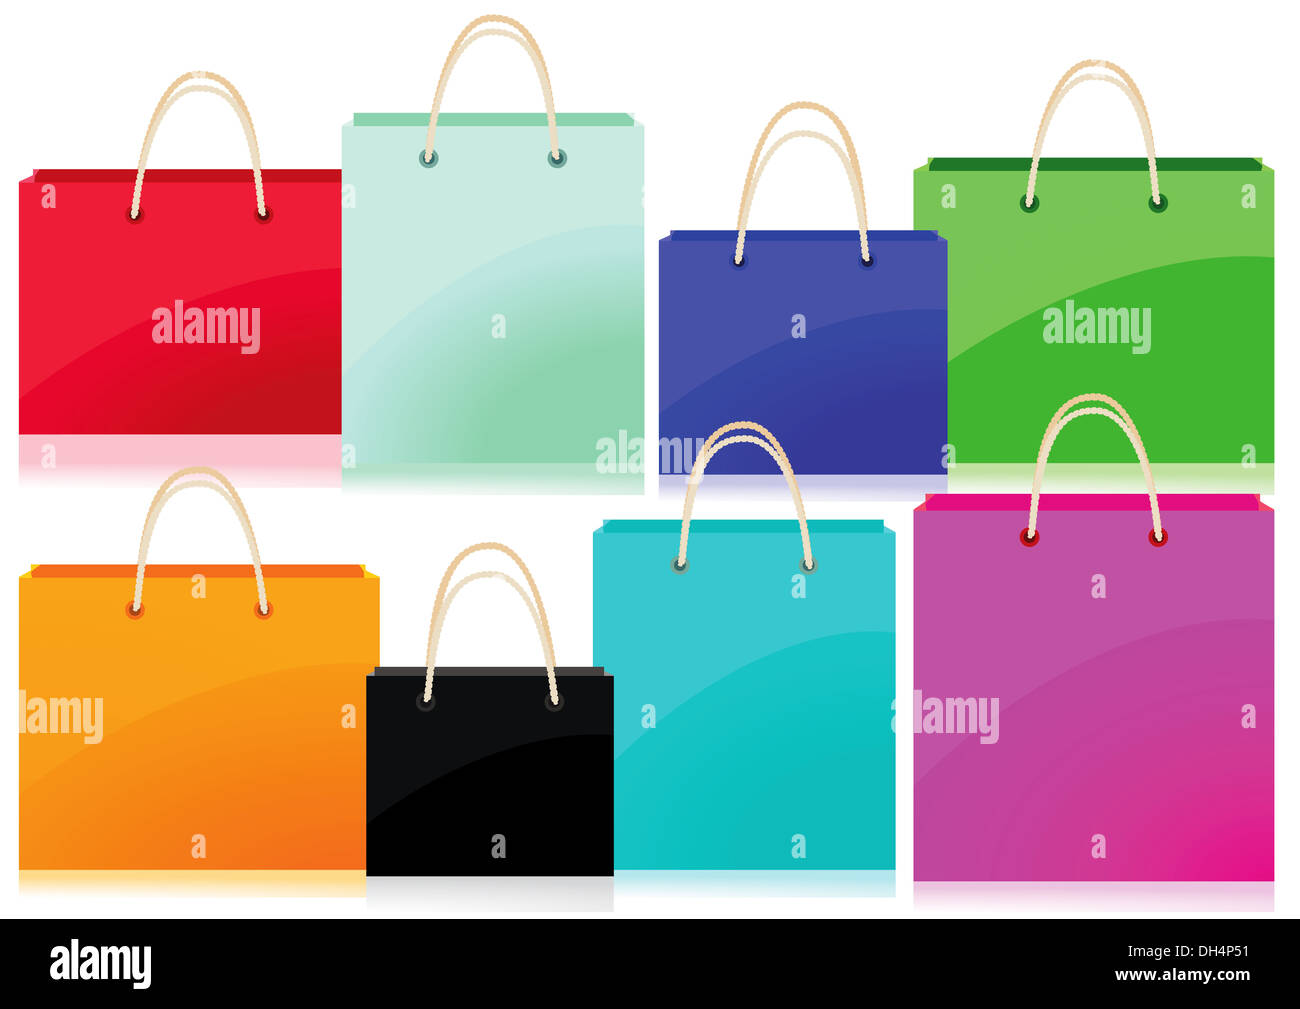 Colorful shopping bags Stock Photo